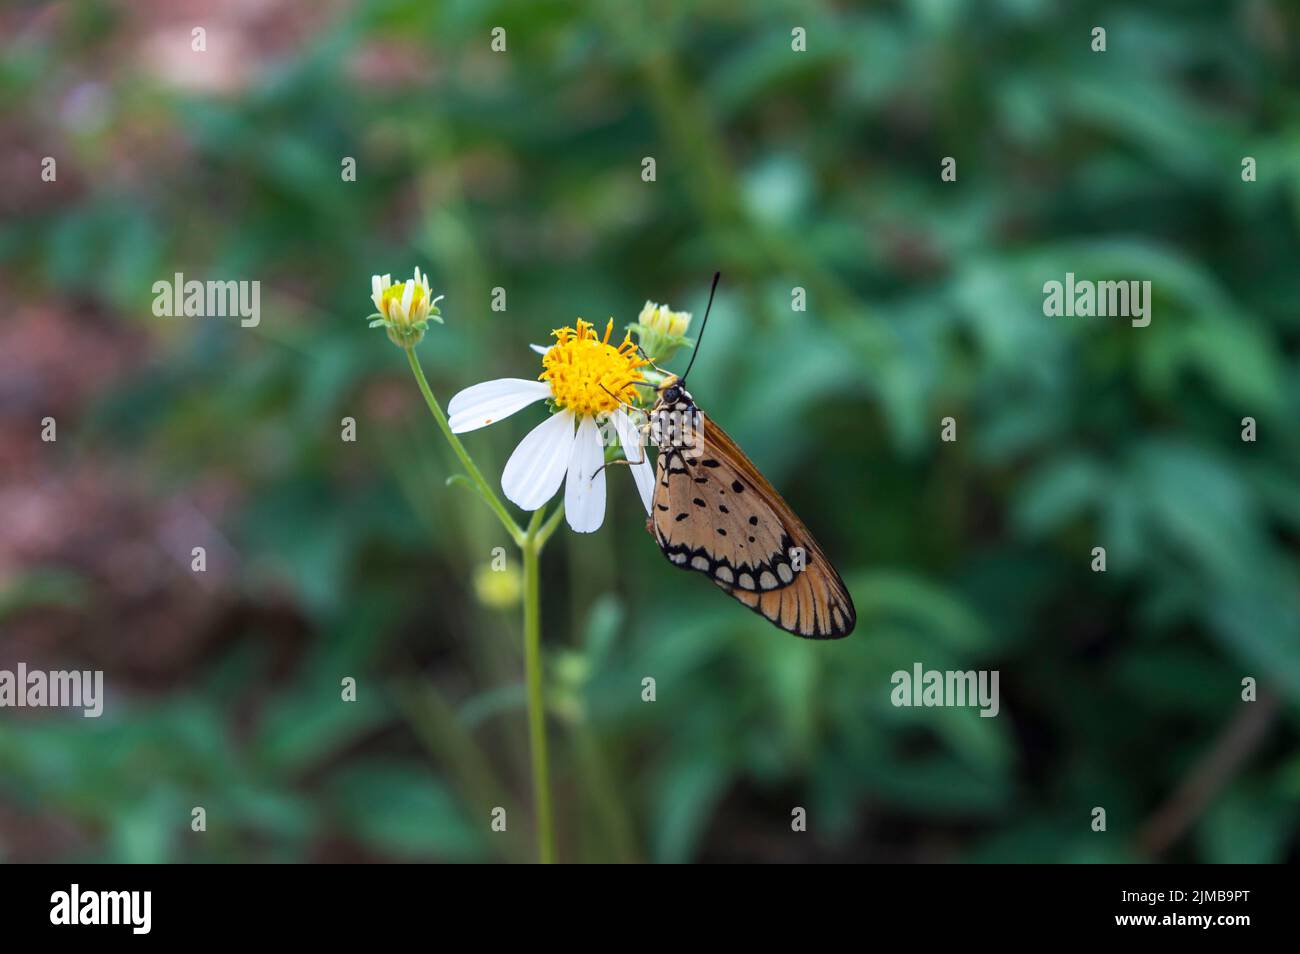 the butterfly acraea terpsicore perched on a flower bidens pilosa. nature photography Stock Photo